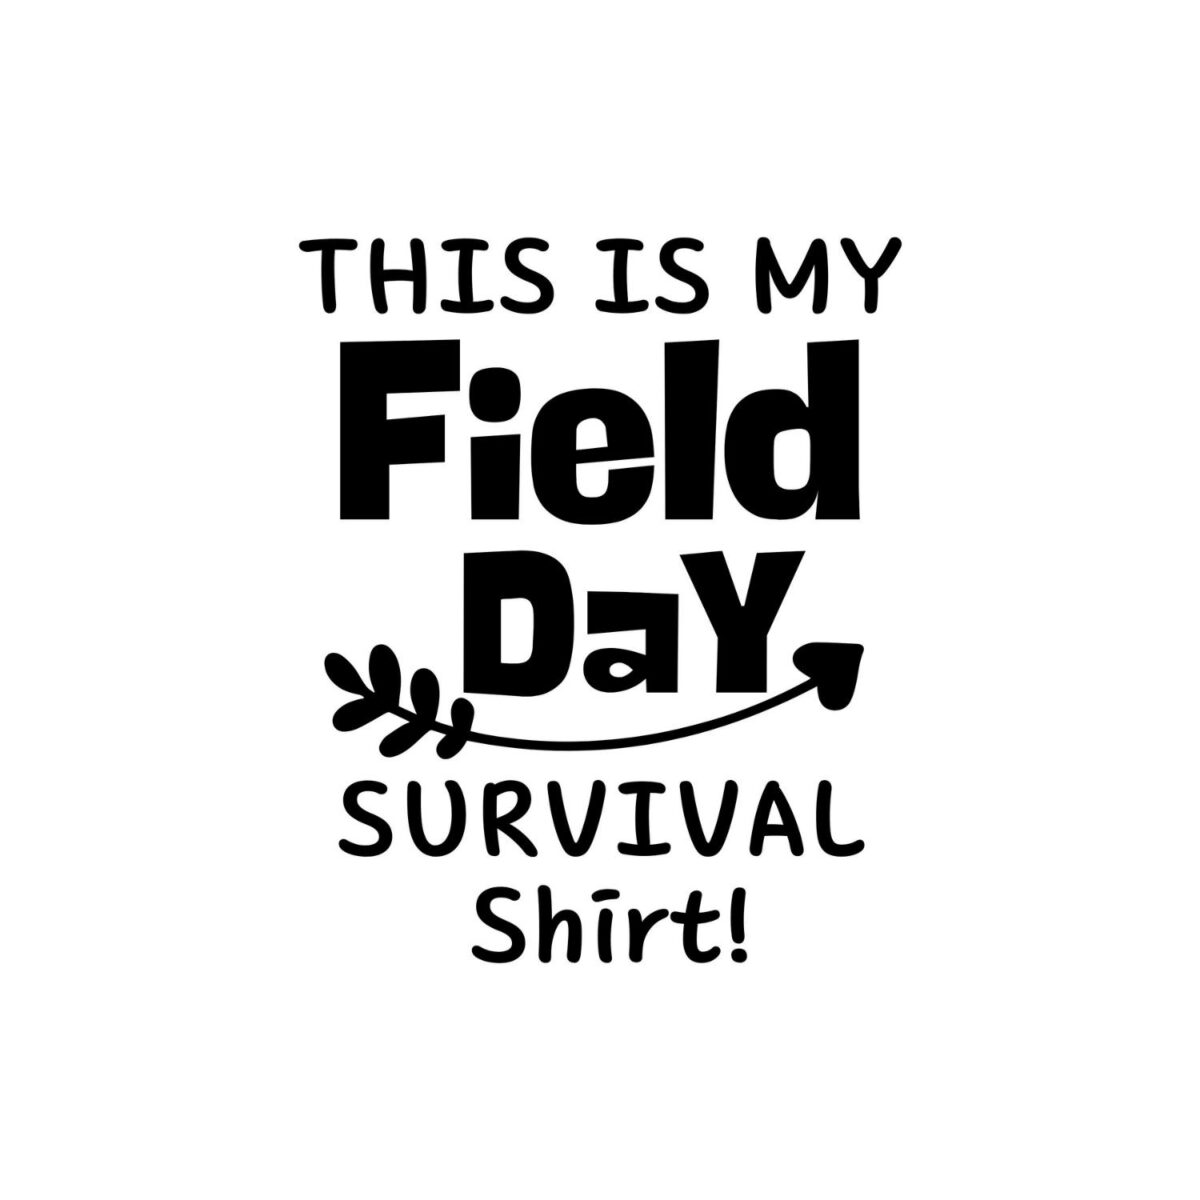 This Is My Field Day Survival Shirt Arrow SVG, PNG, JPG, PDF Files